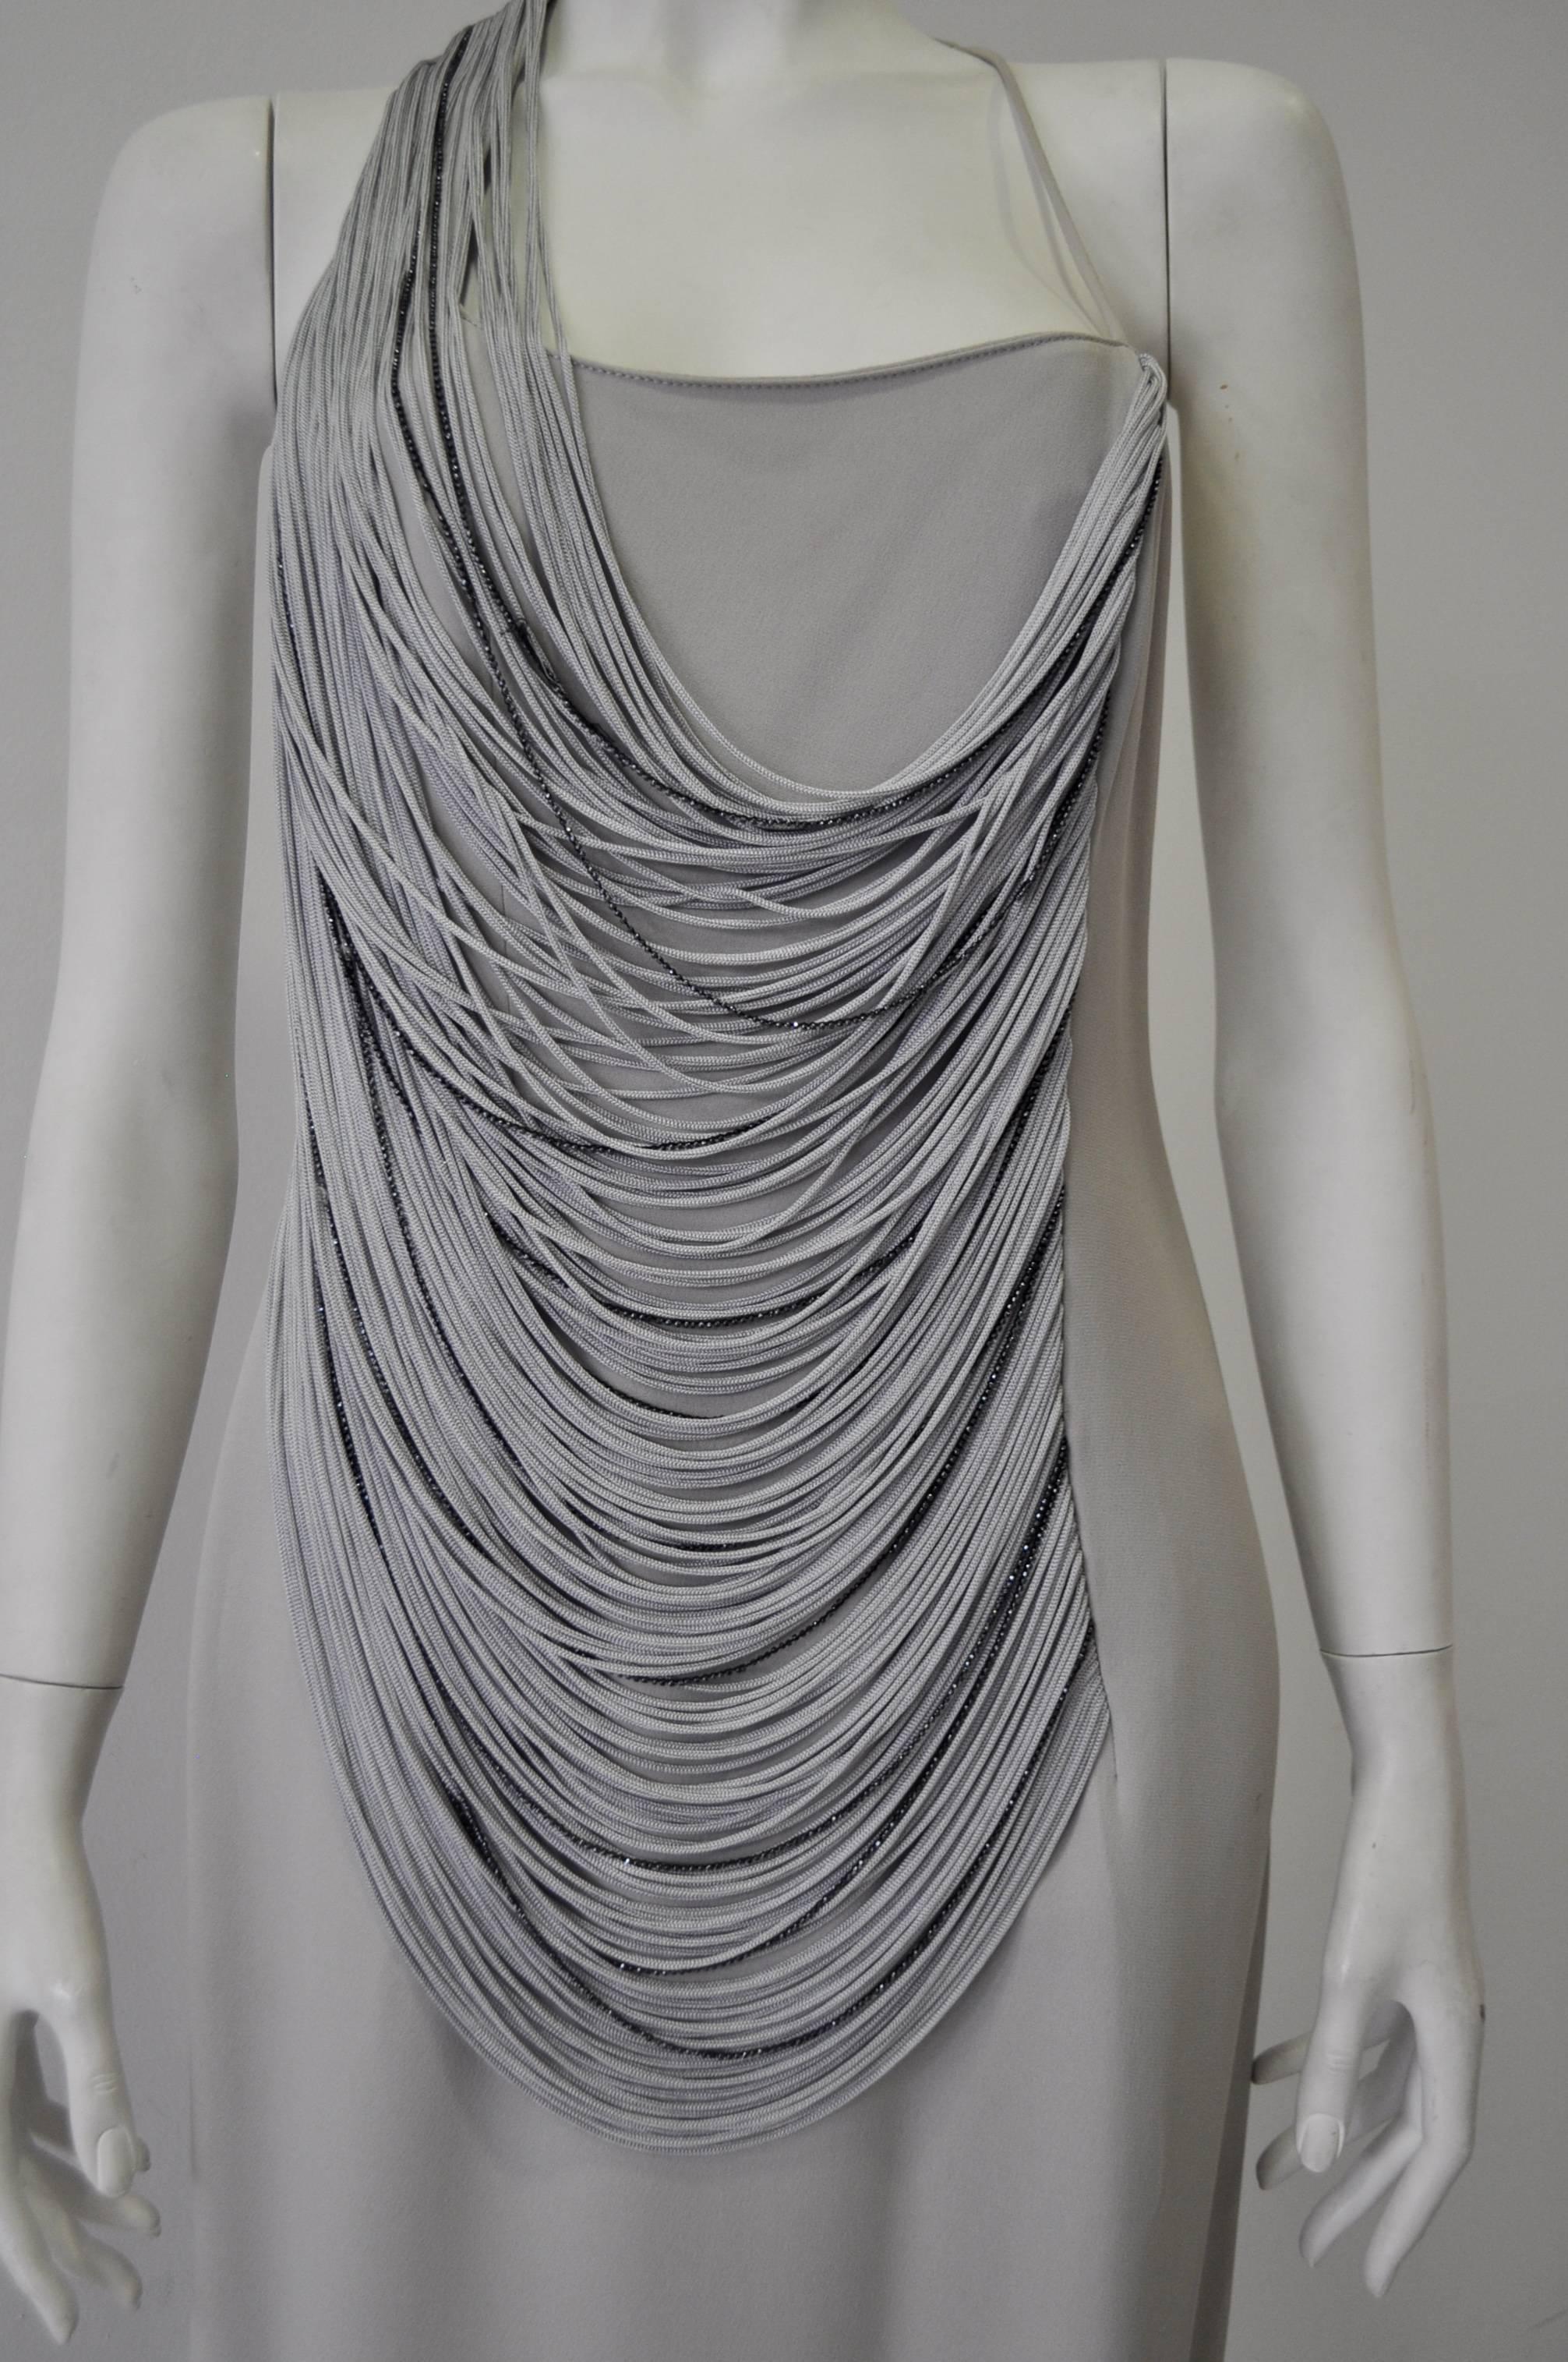 Luxurious Angelo Mozzillo Multistrand Chord Maxi Dress In Excellent Condition For Sale In Athens, Agia Paraskevi